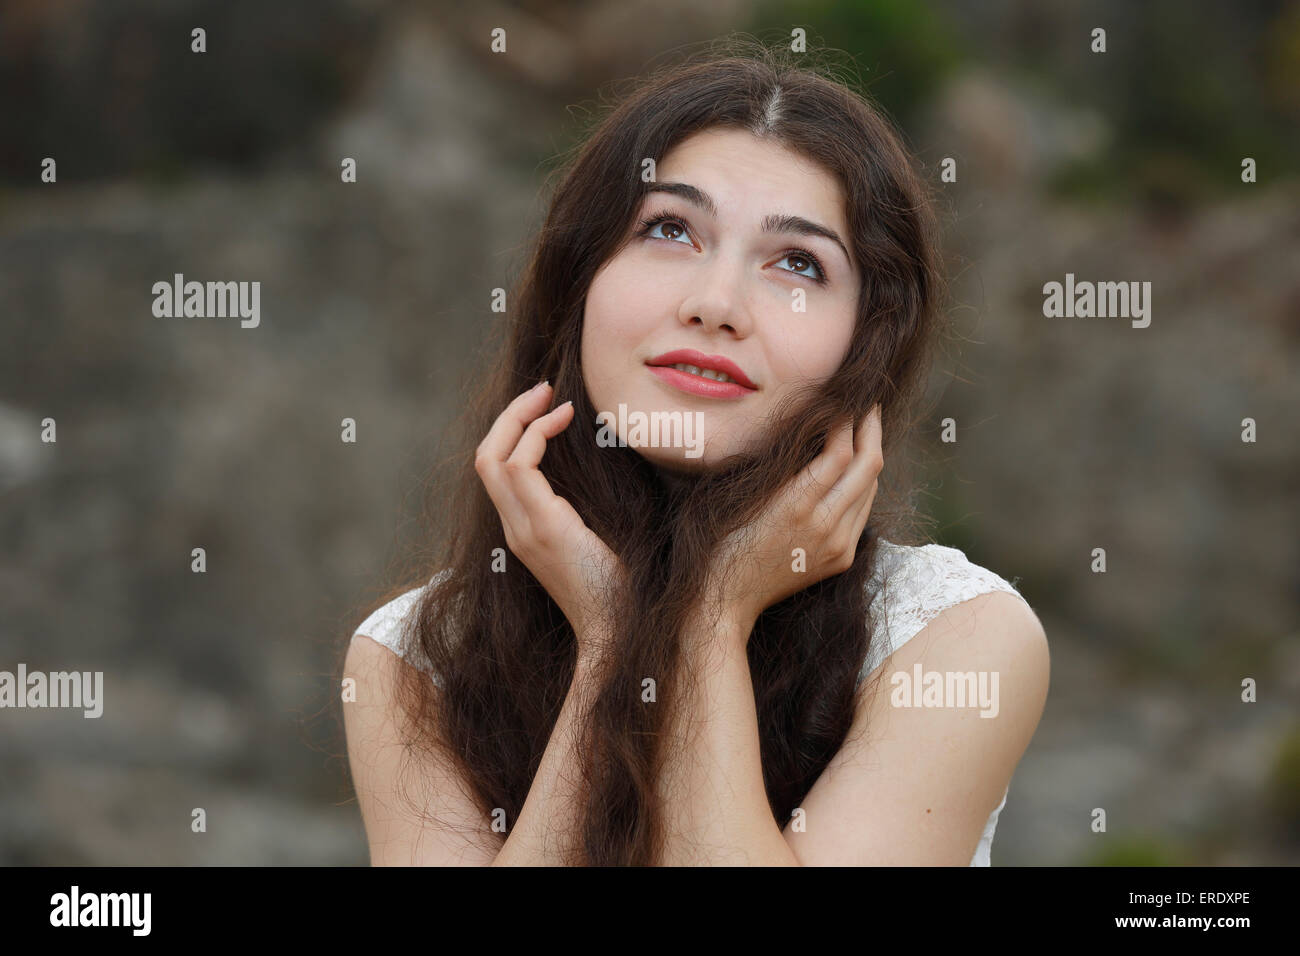 Young woman with long brown hair, misty-eyed Stock Photo